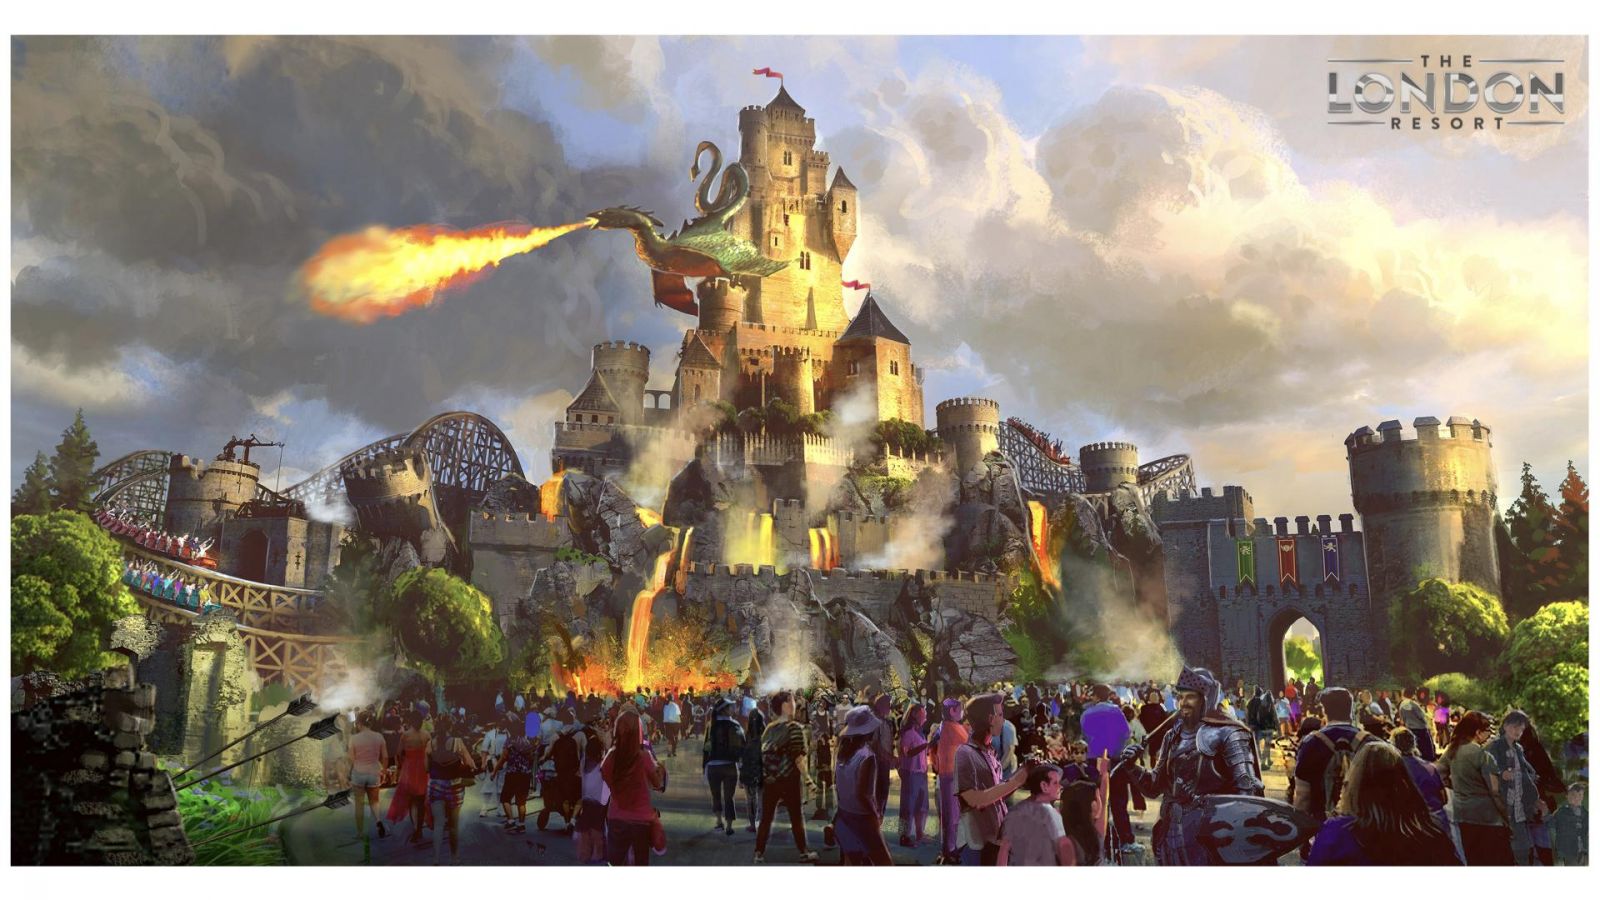 The Kingdom Land at The London Resort concept art